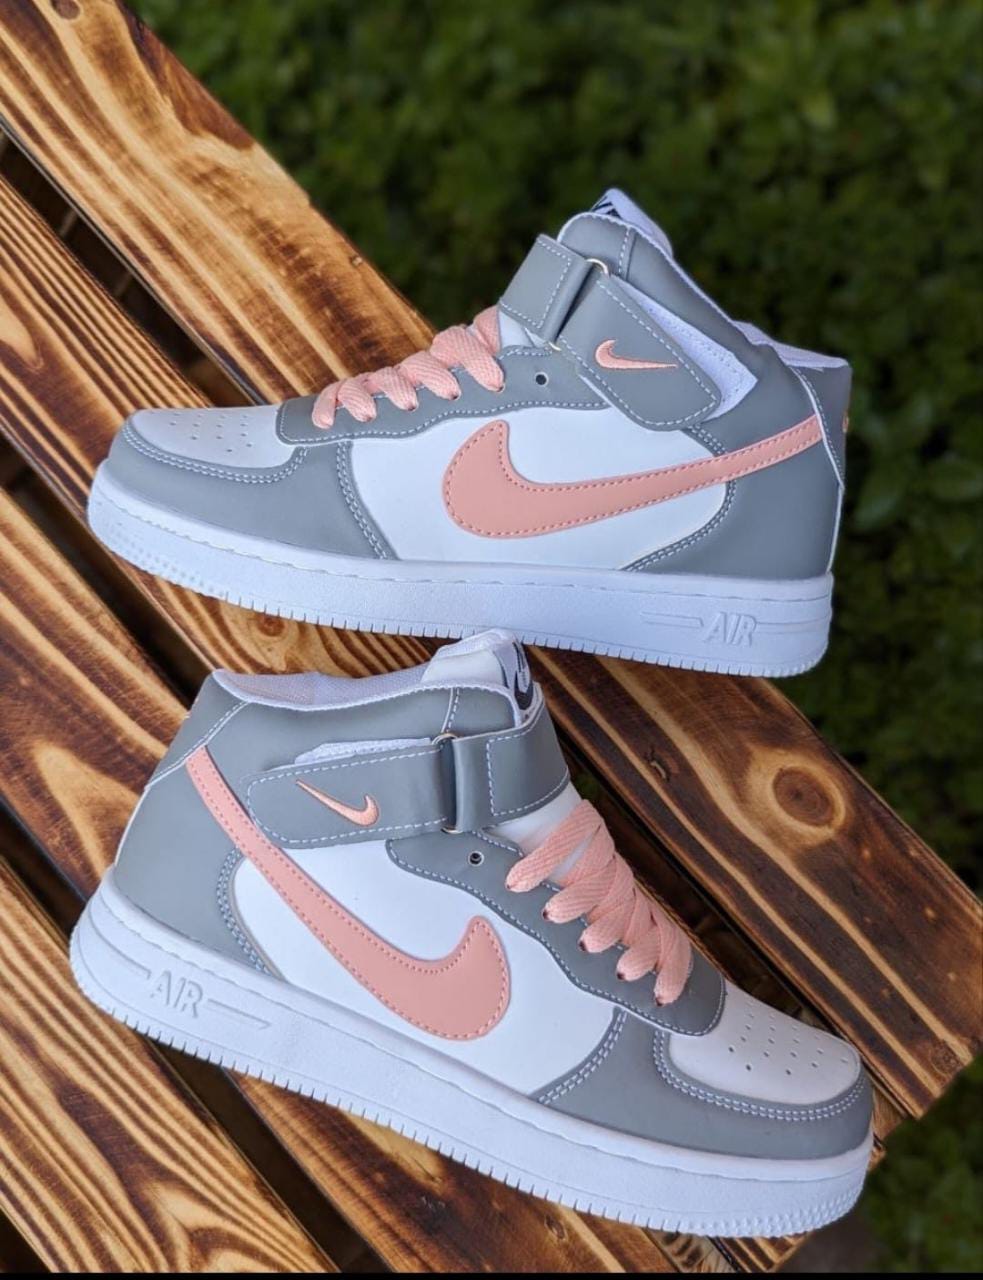 Exclusive discounts for Nike Air Force Comfortable High Top Cut Unisex  Breathable Airforce Men Women Sports Sneakers Shoes